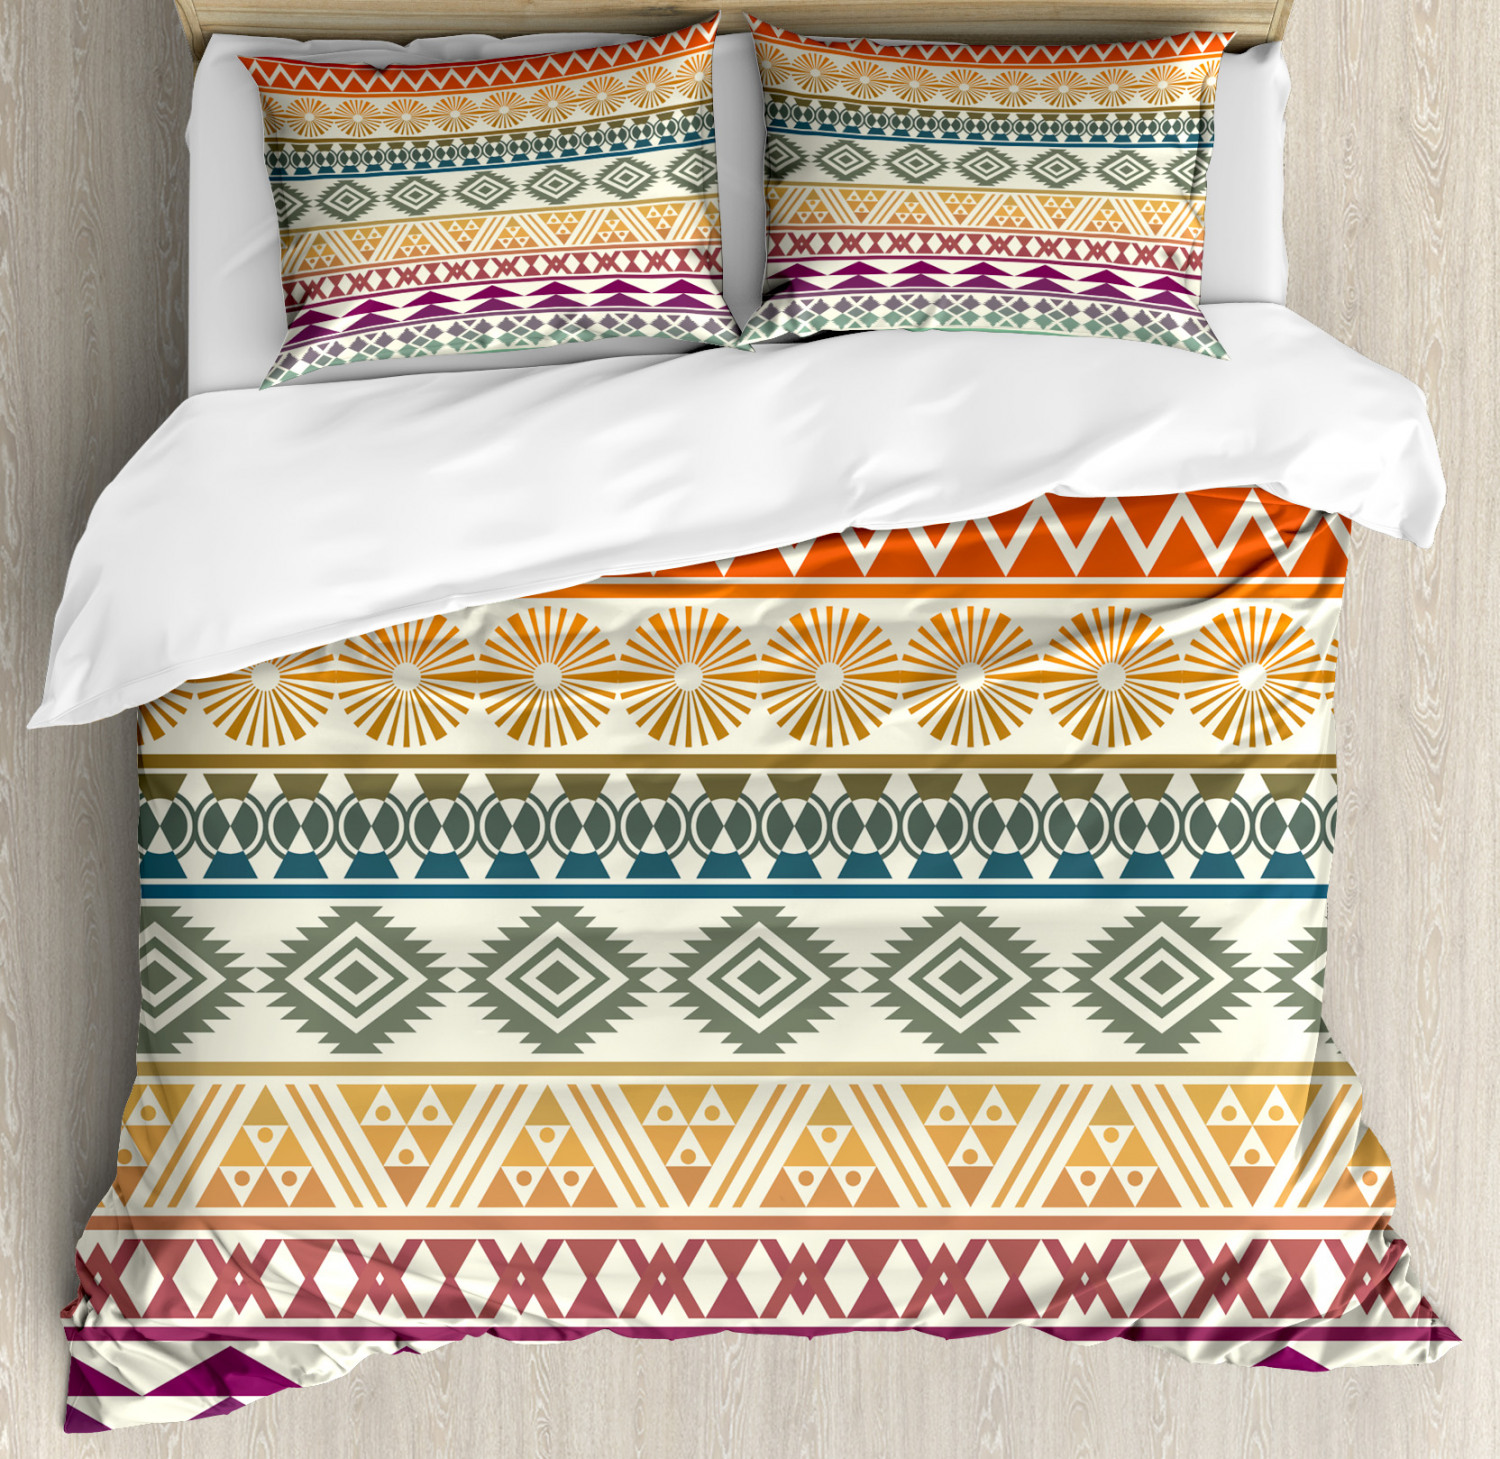 Aztec Duvet Cover Set Twin Queen King Sizes with Pillow Shams Bedding ...